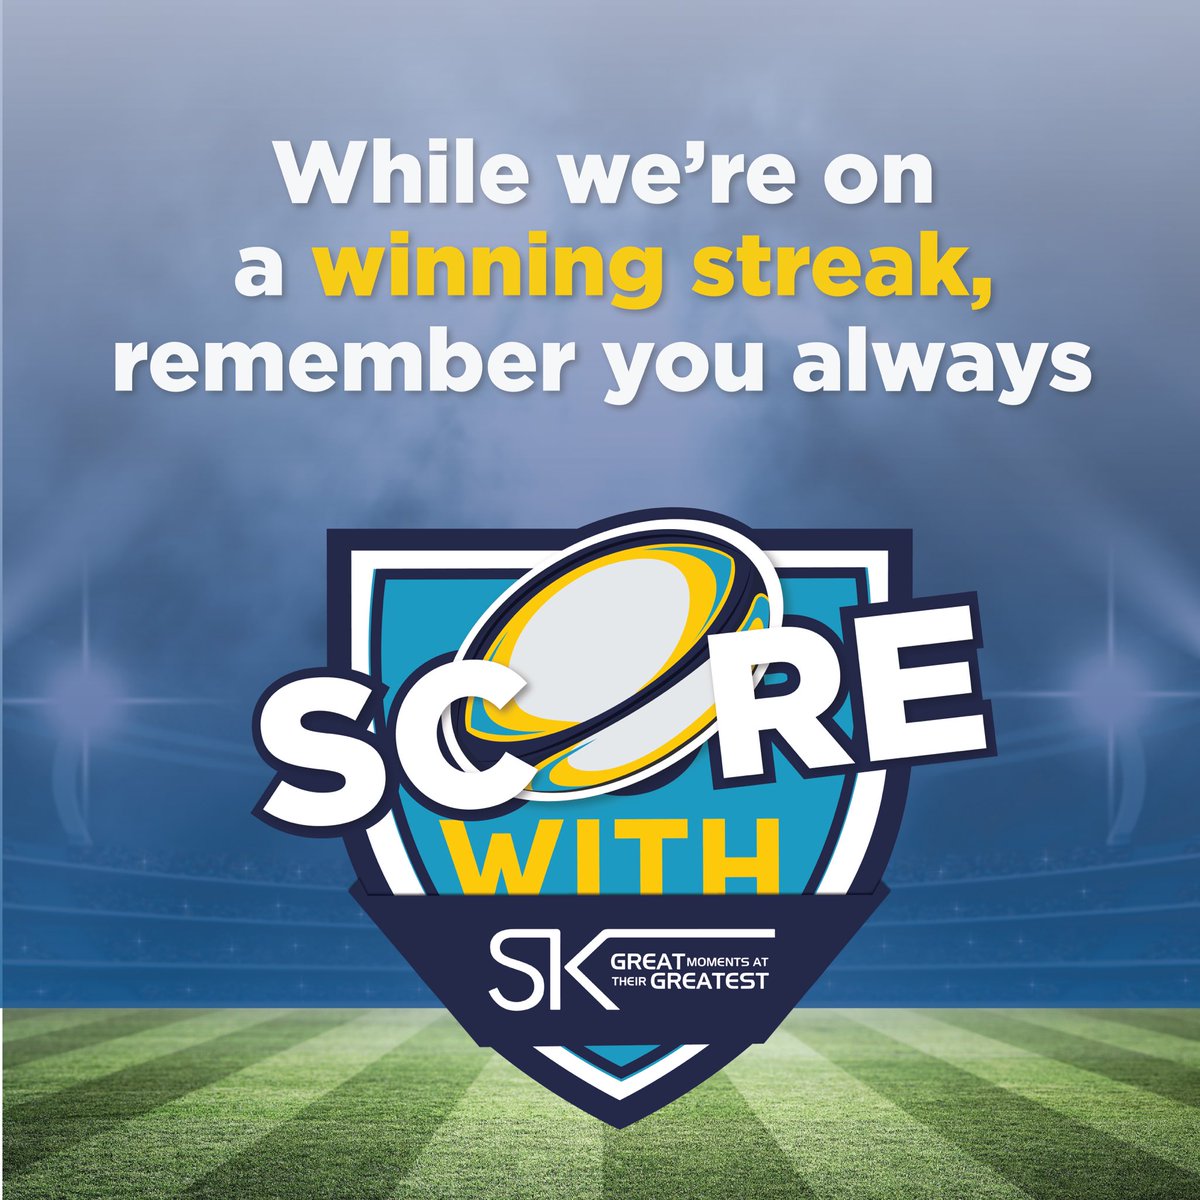 Wow, what an incredible win by the Bokke!

Congratulations to our Bokke, your dedication and teamwork is truly admirable. 💙

#DoMoviesRight #SterKinekor#ScoreWithSterKinekor #Cadbury #TryLineTreatsCombo #TheSweetestRugbyPostInSa #Bokke #Rugby #Rugbylove #RWC2023 #BoksOffice